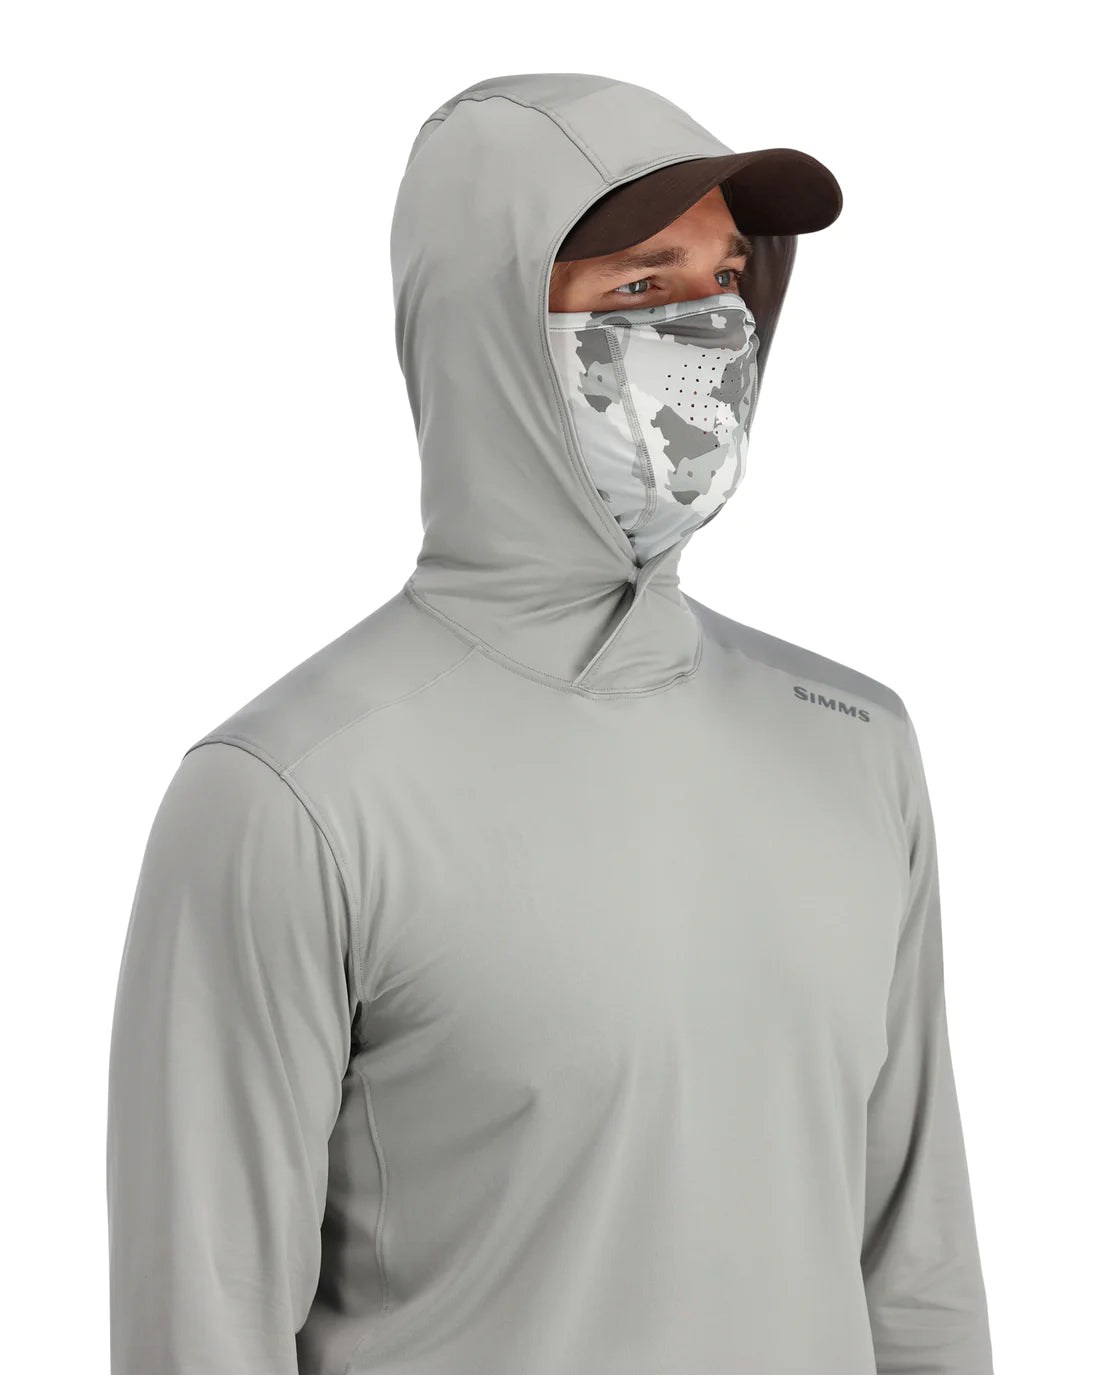 Simms Solarflex Guide Hoody -  - Mansfield Hunting & Fishing - Products to prepare for Corona Virus